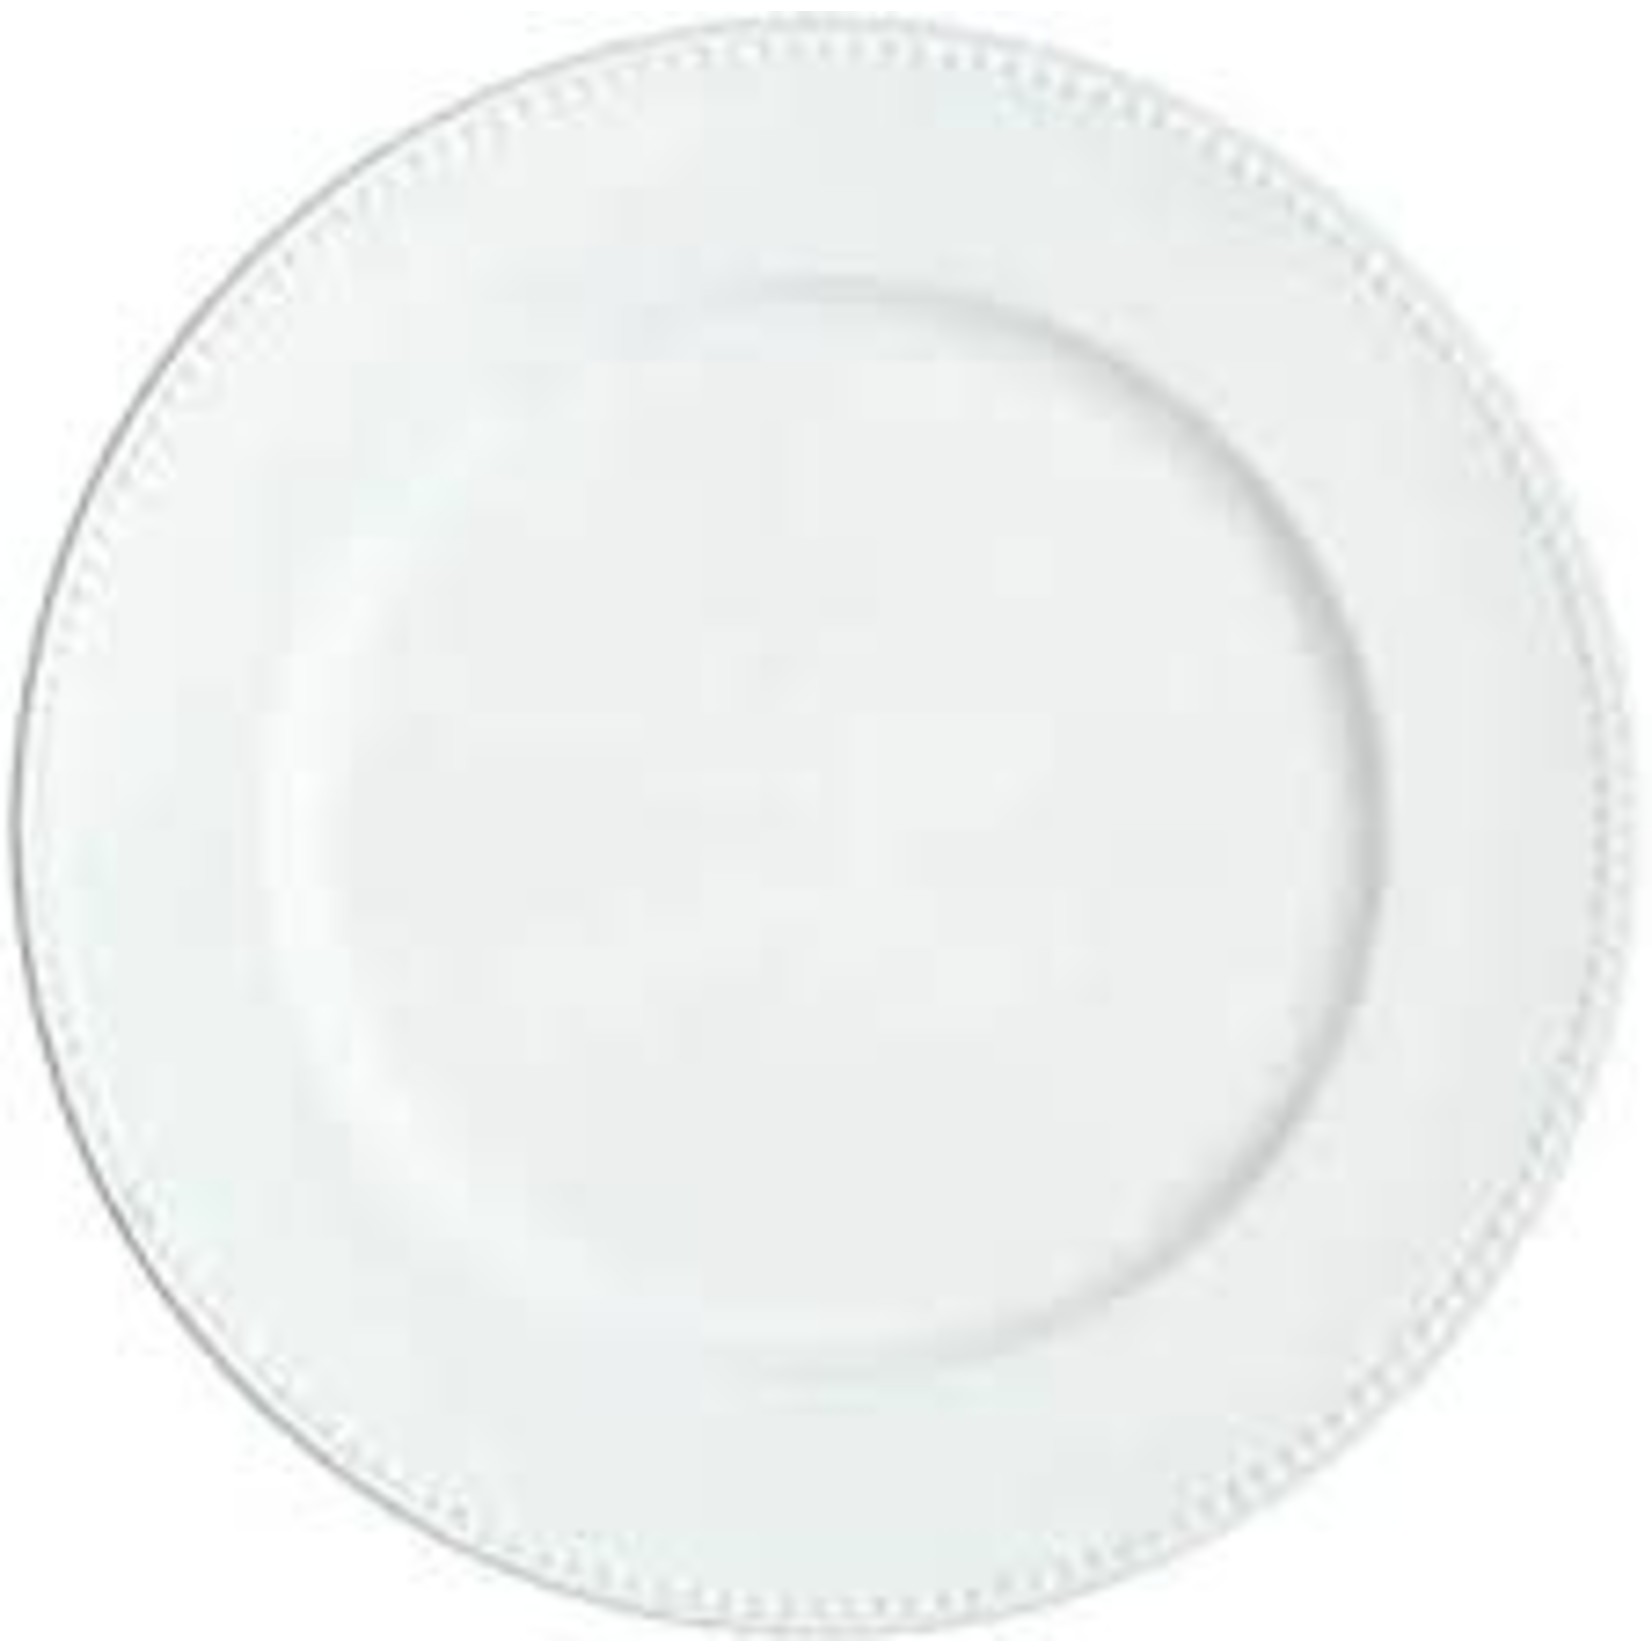 Palate and Plate AW-1873 9" Round Beaded Plate White 12/cs